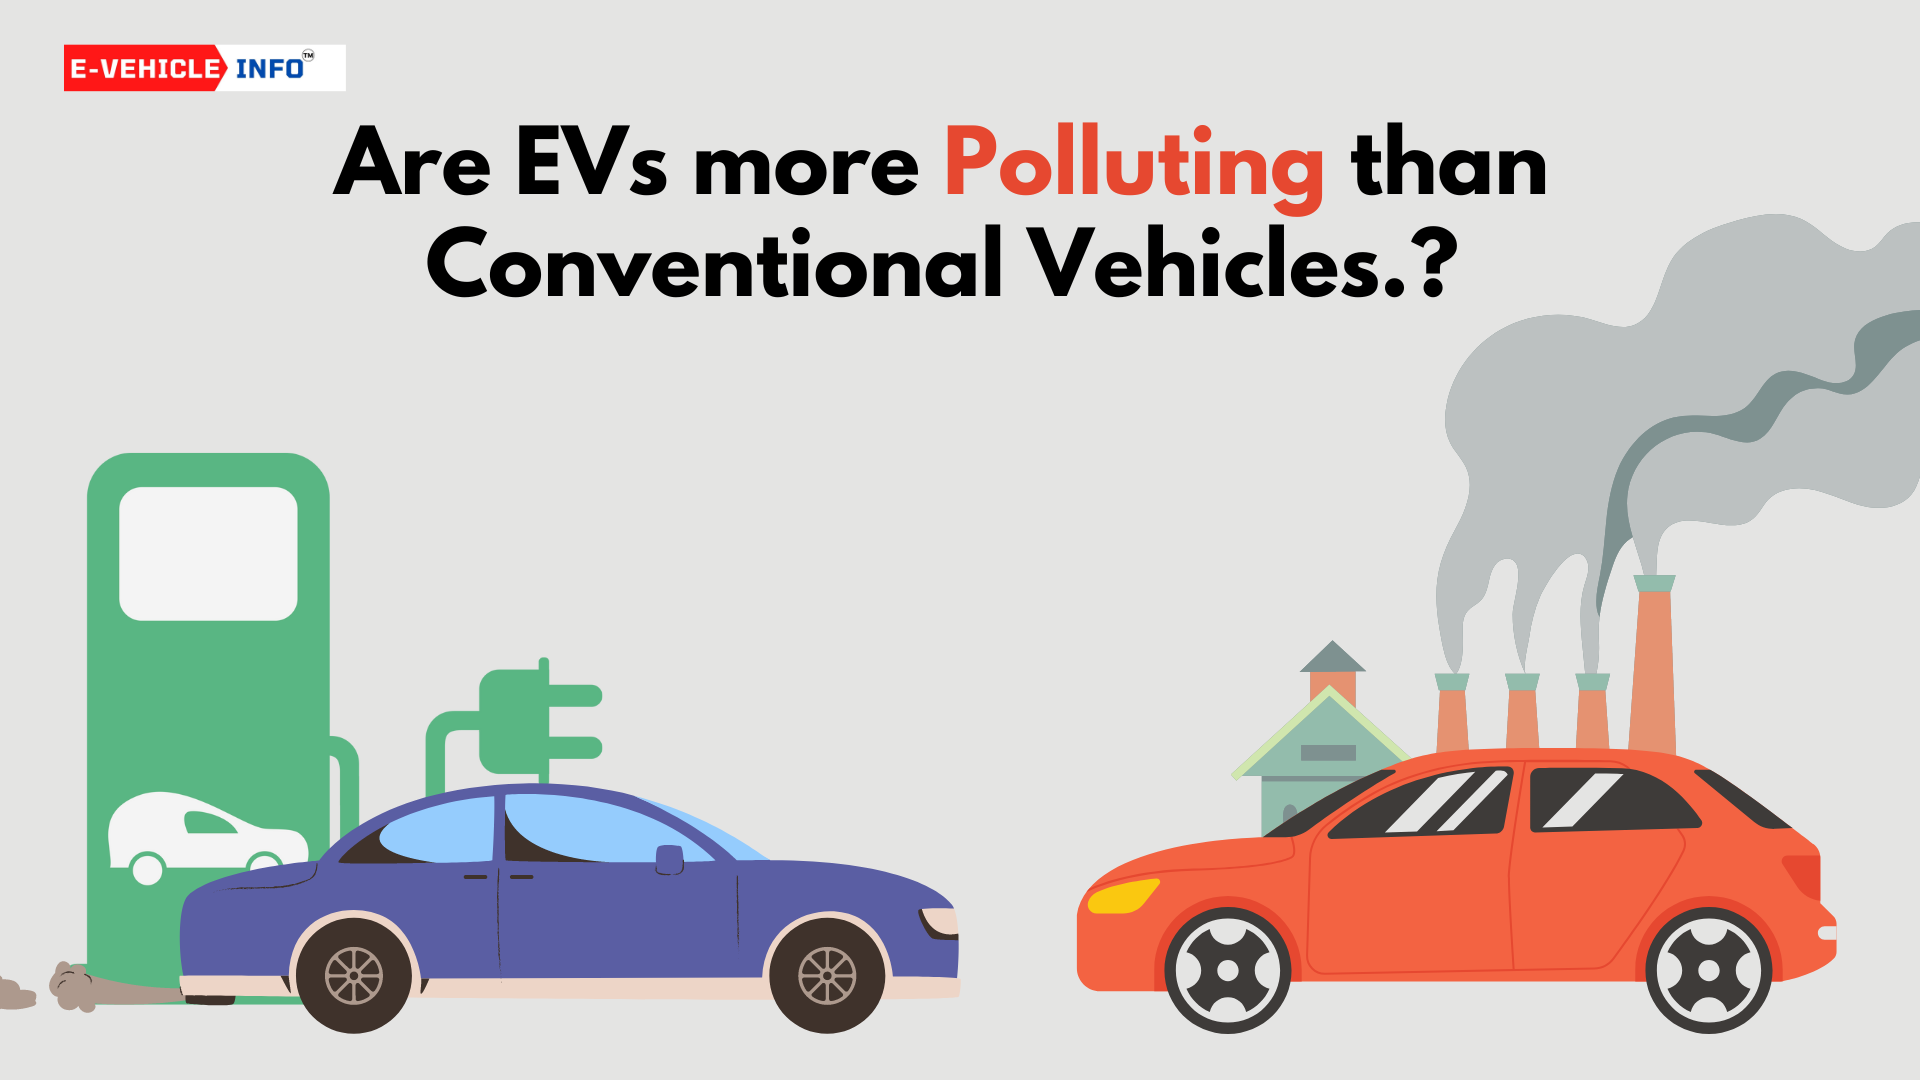 https://e-vehicleinfo.com/are-evs-more-polluting-than-conventional-vehicles/